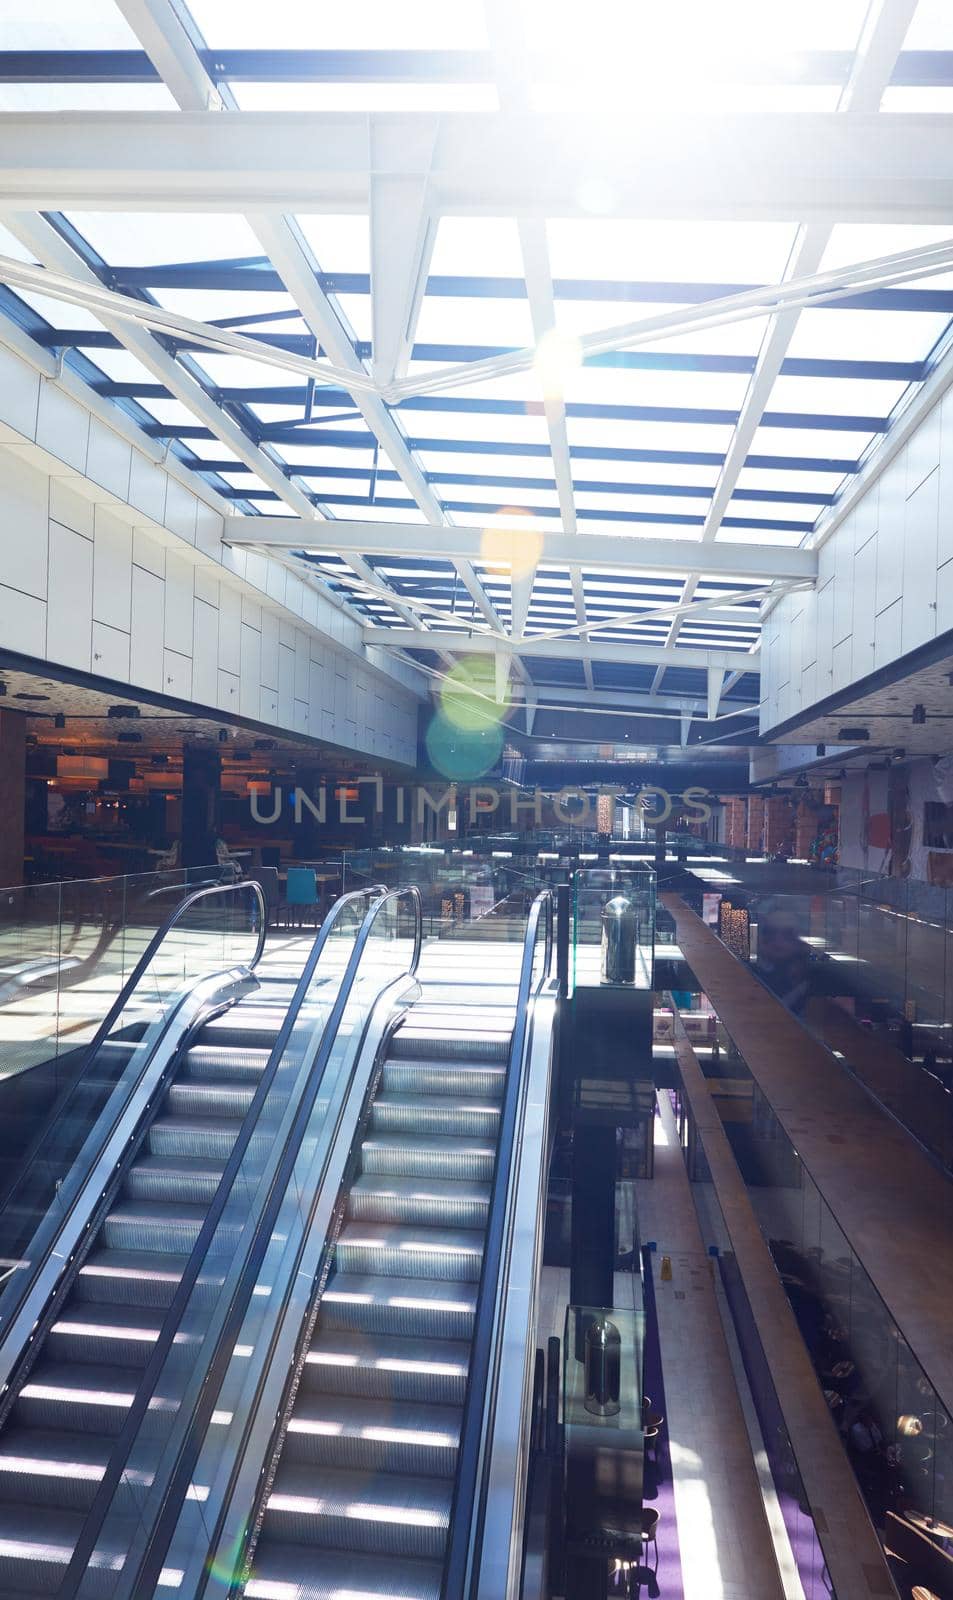 modern shopping mall store  interior escalator with lens flare